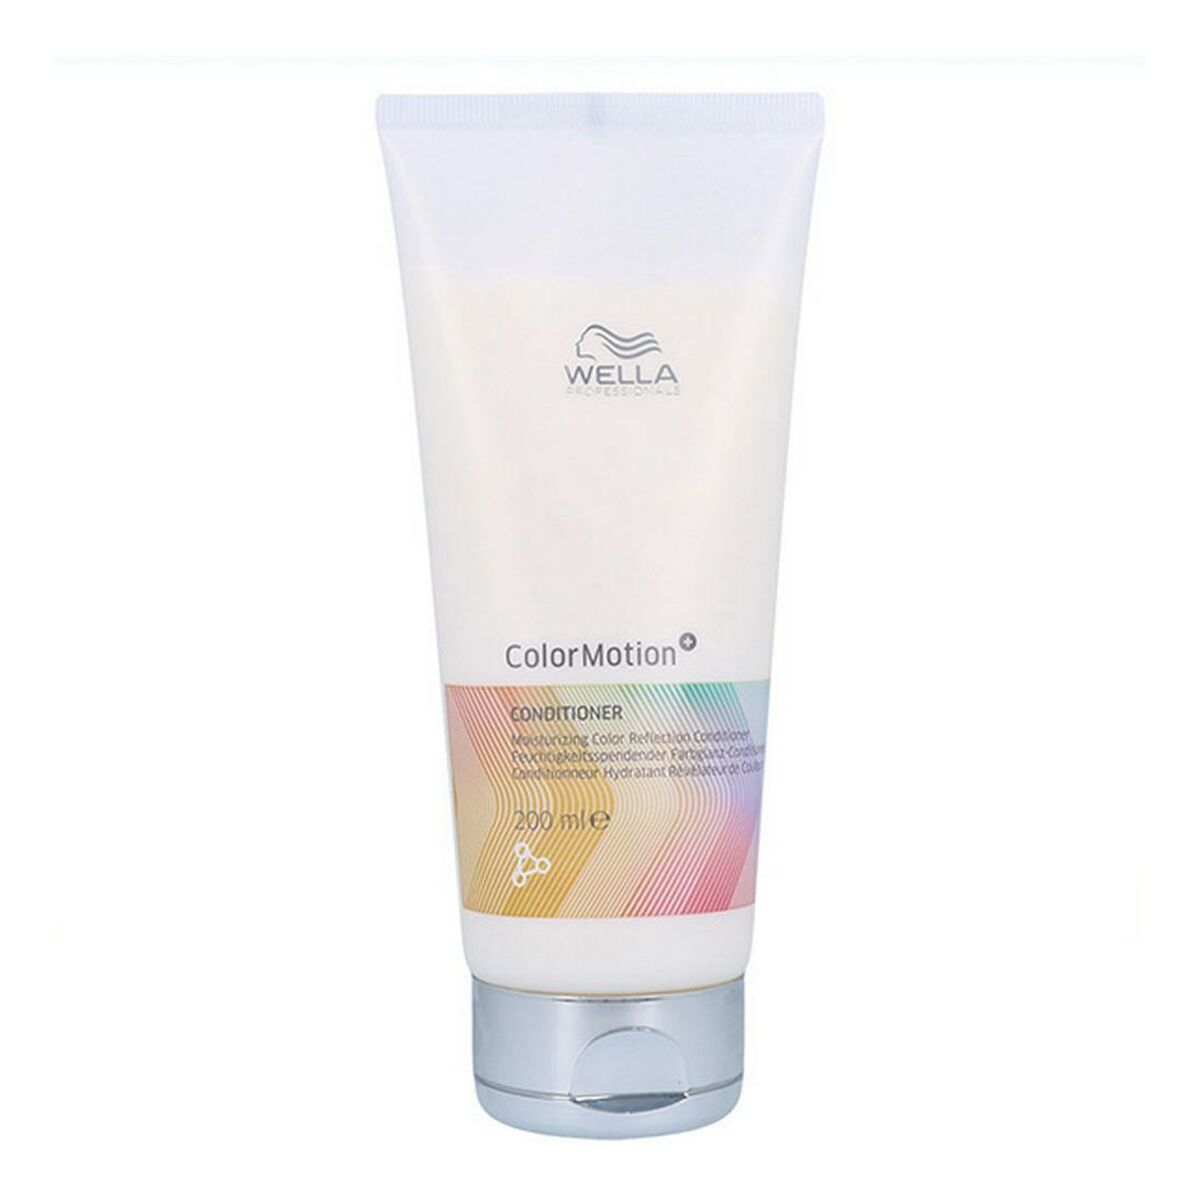 Conditioner Color Motion Wella Color Motion (200 ml) | Wella | Aylal Beauty